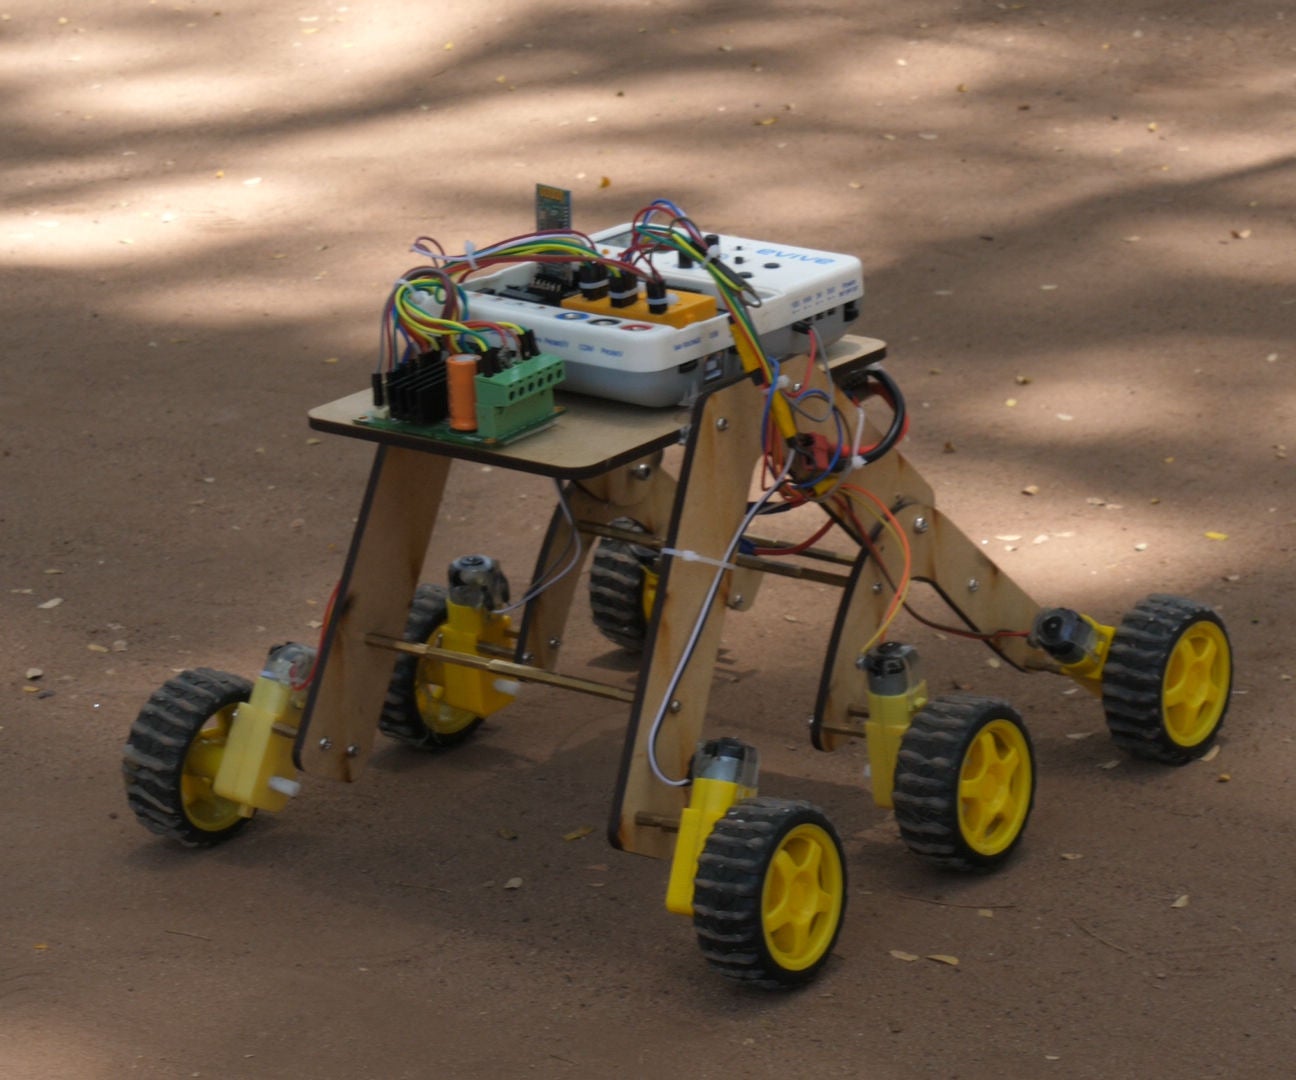 Mars Rover: Smartphone Controlled Stair Climbing Robot Using Evive- Arduino Based Embedded Platform